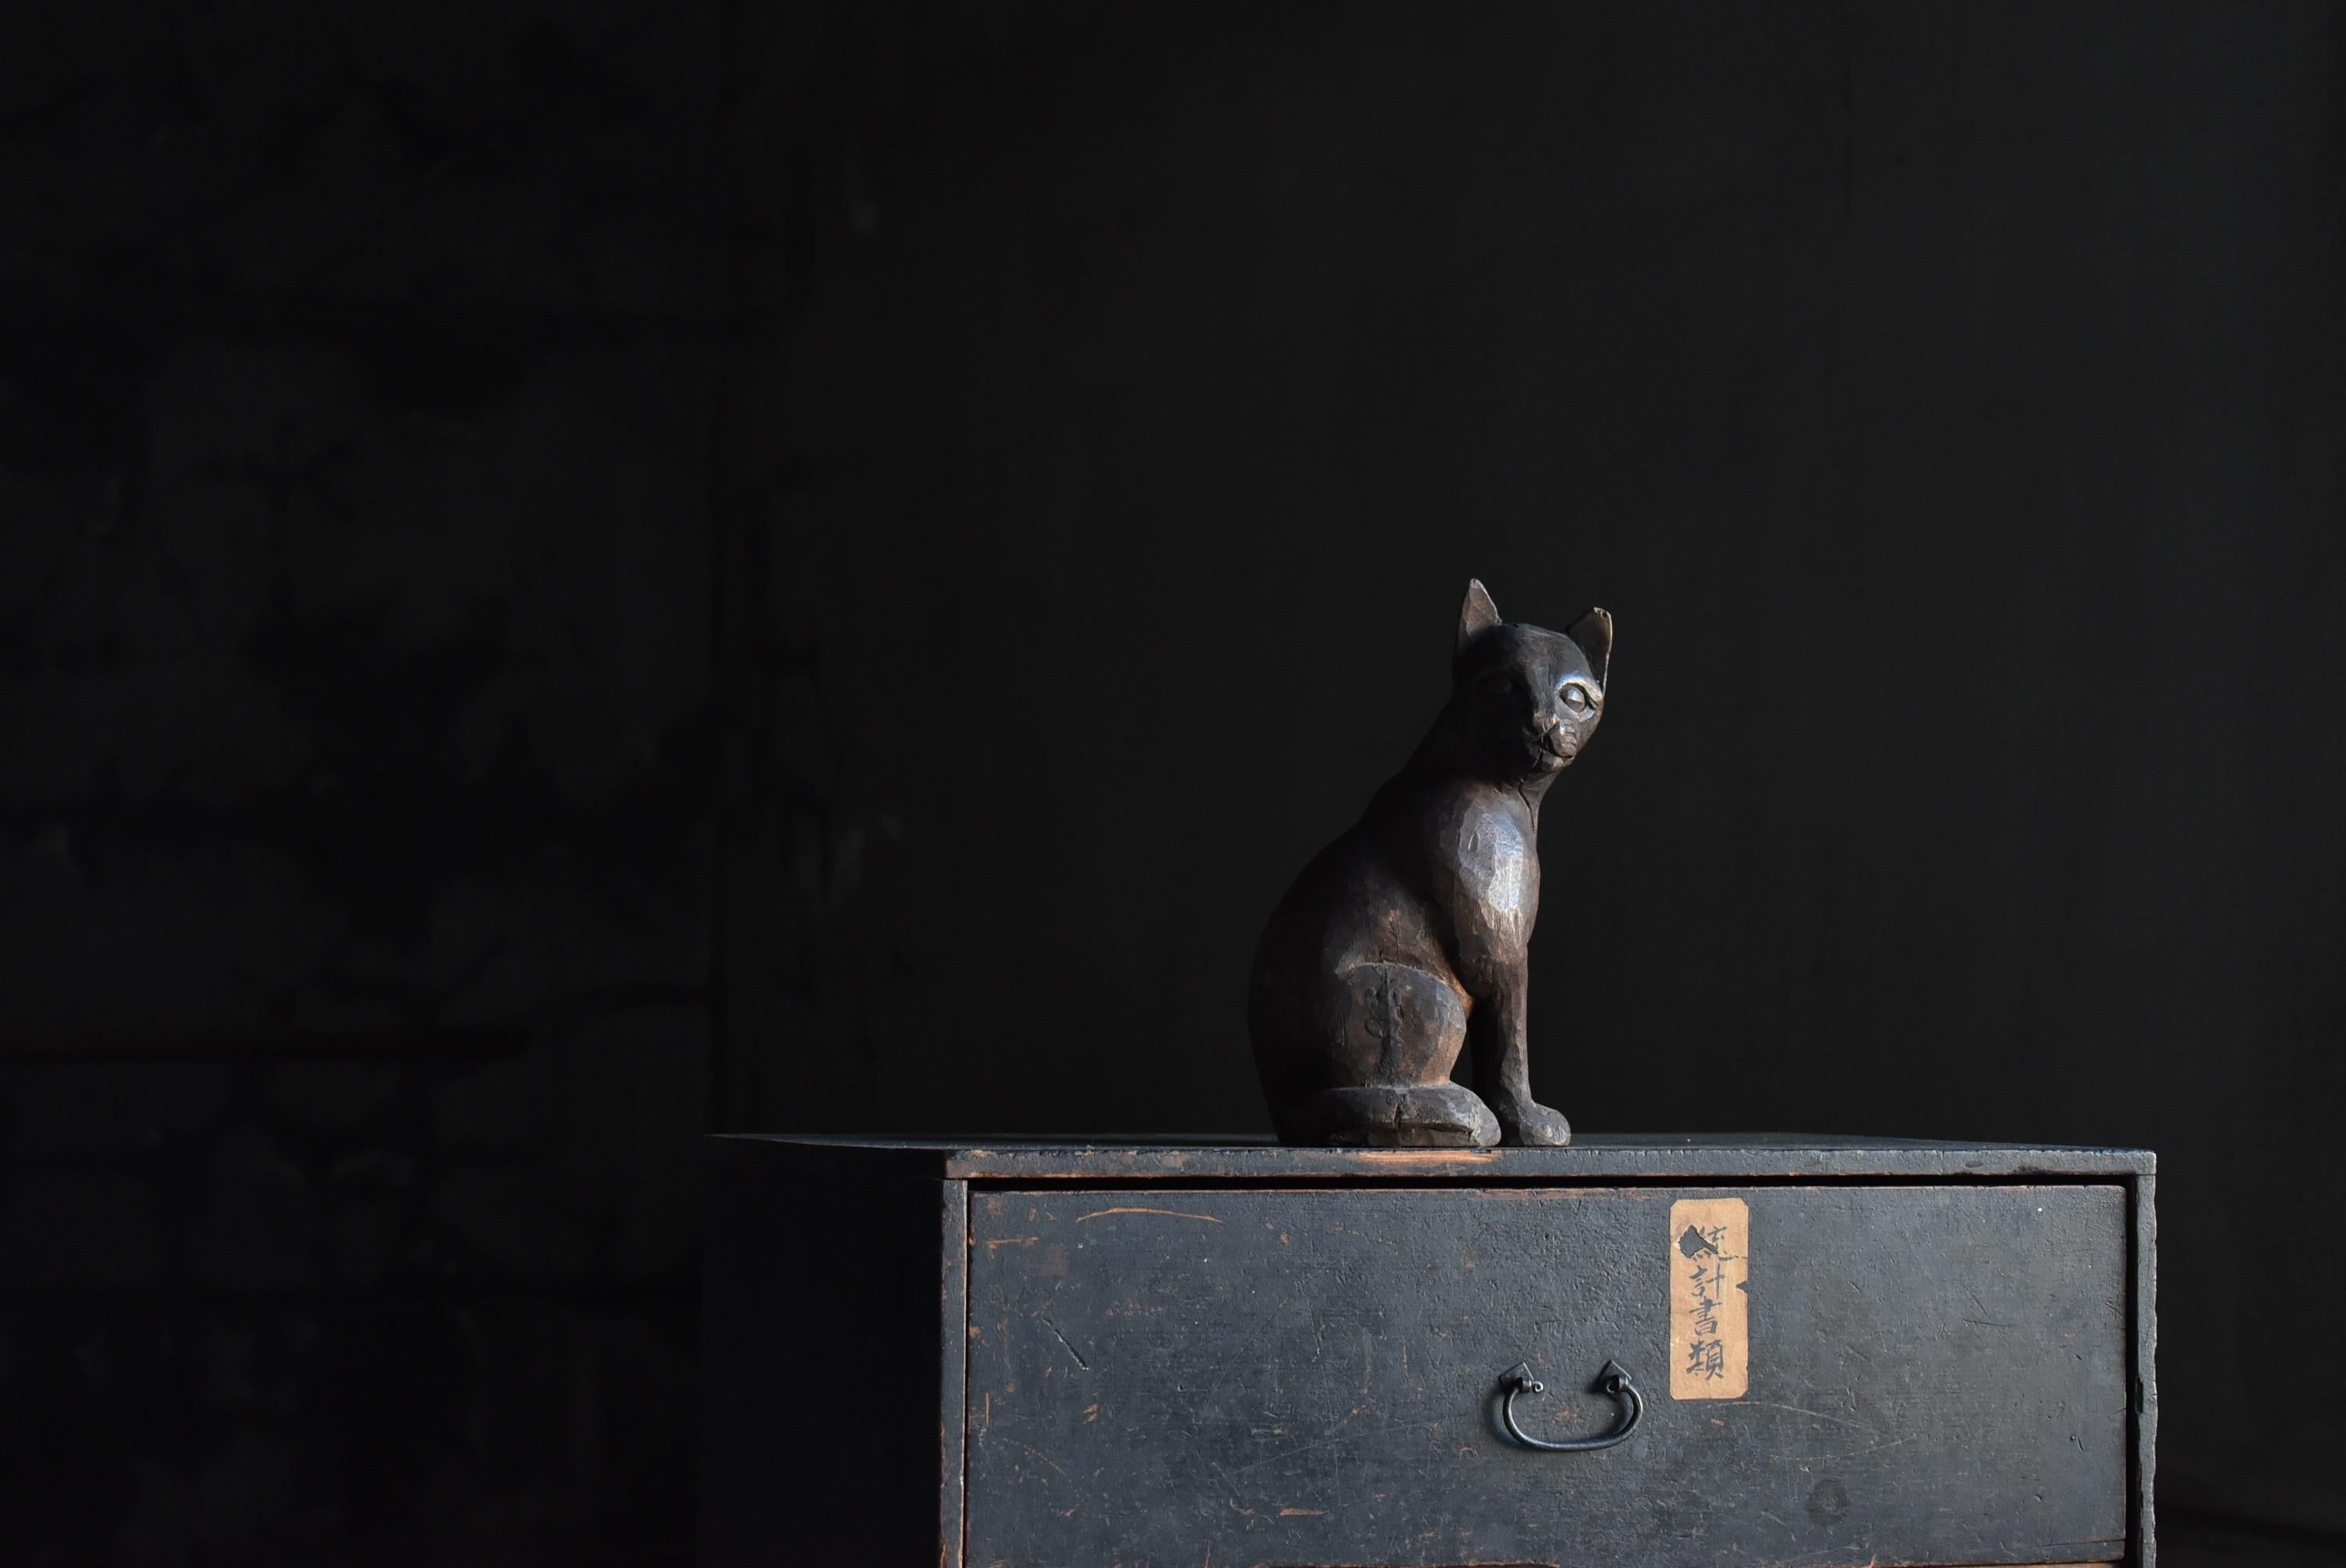 Old Japanese wood carving cat.
It seems to be from the Meiji era to the Taisho era. (1860s-1920s)

I feel the deep love of the creator.
Over time, it has a great taste.

I first encountered such a wonderful item in my life.
Fortunately, there